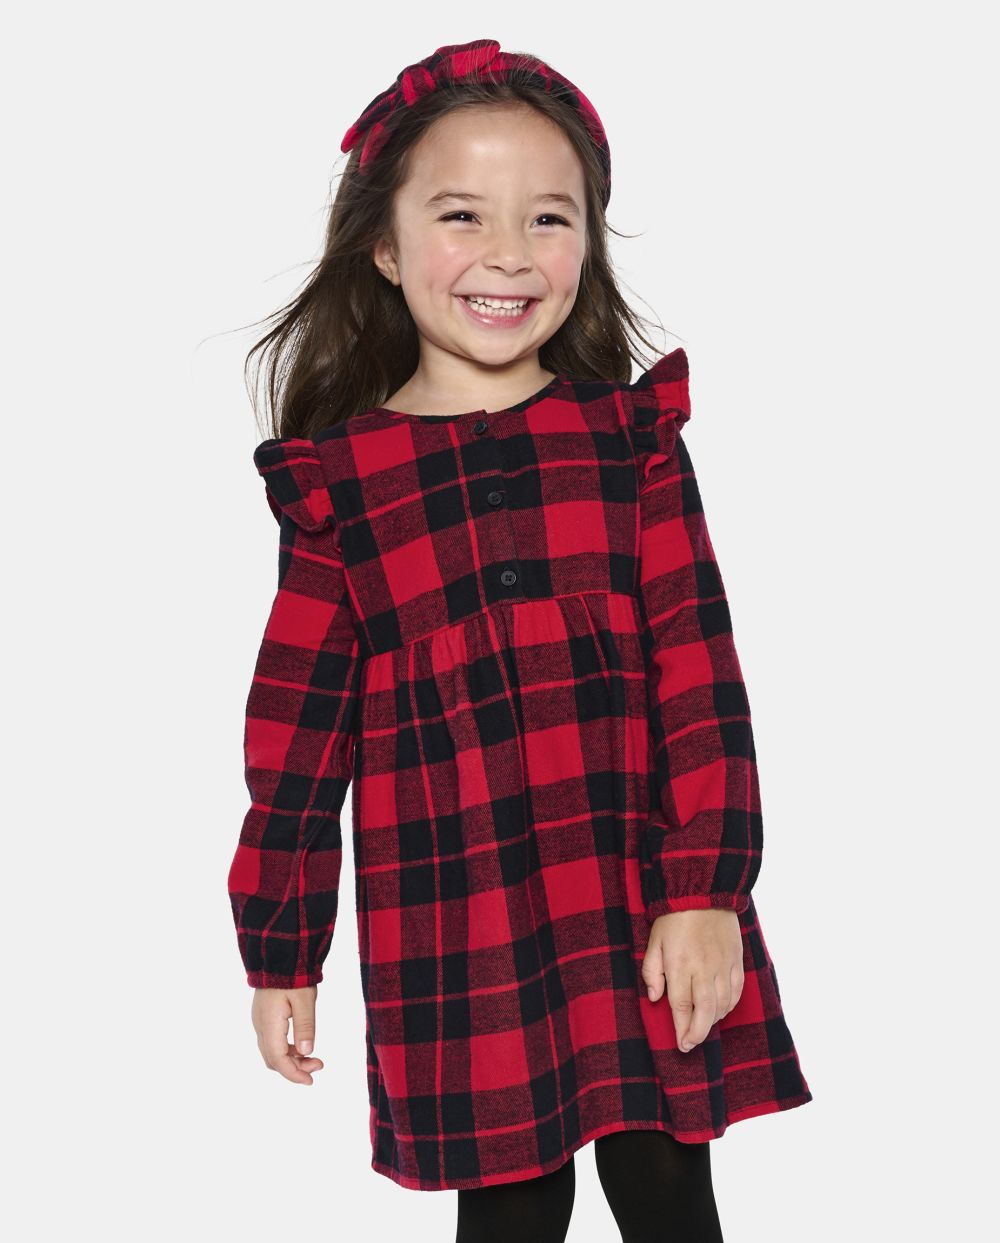 Toddler Baby Above the Knee Plaid Print Crew Neck Flutter Long Sleeves Button Front Shirt Dress